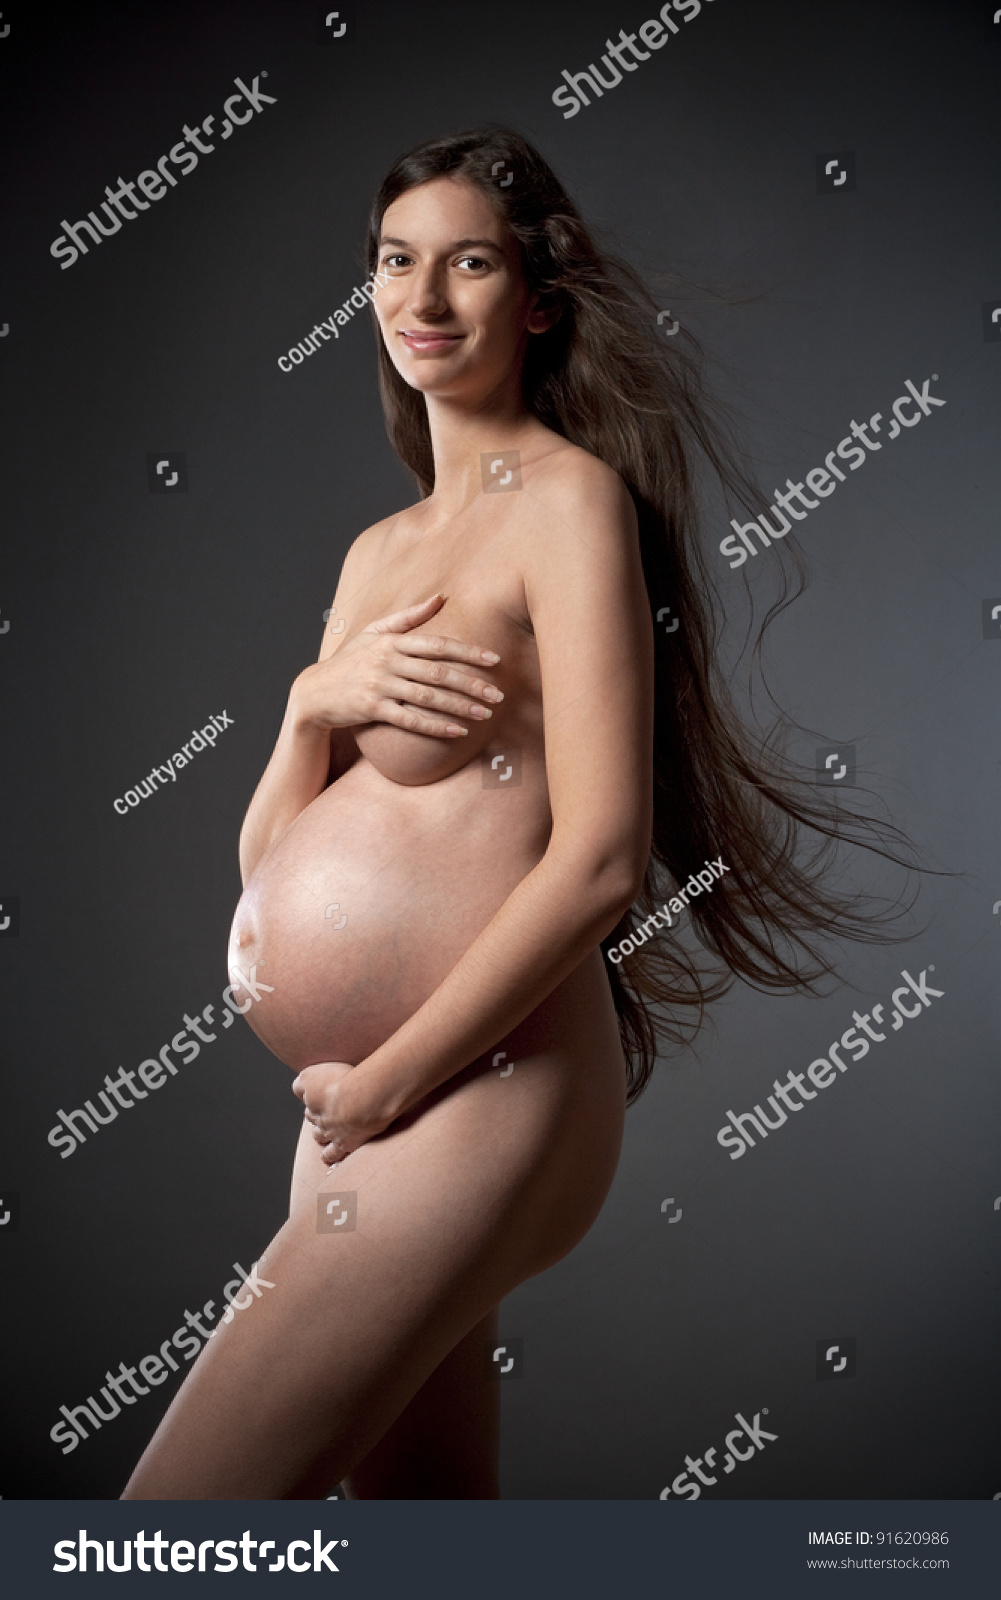 long hair pregnant nude sexy video pics